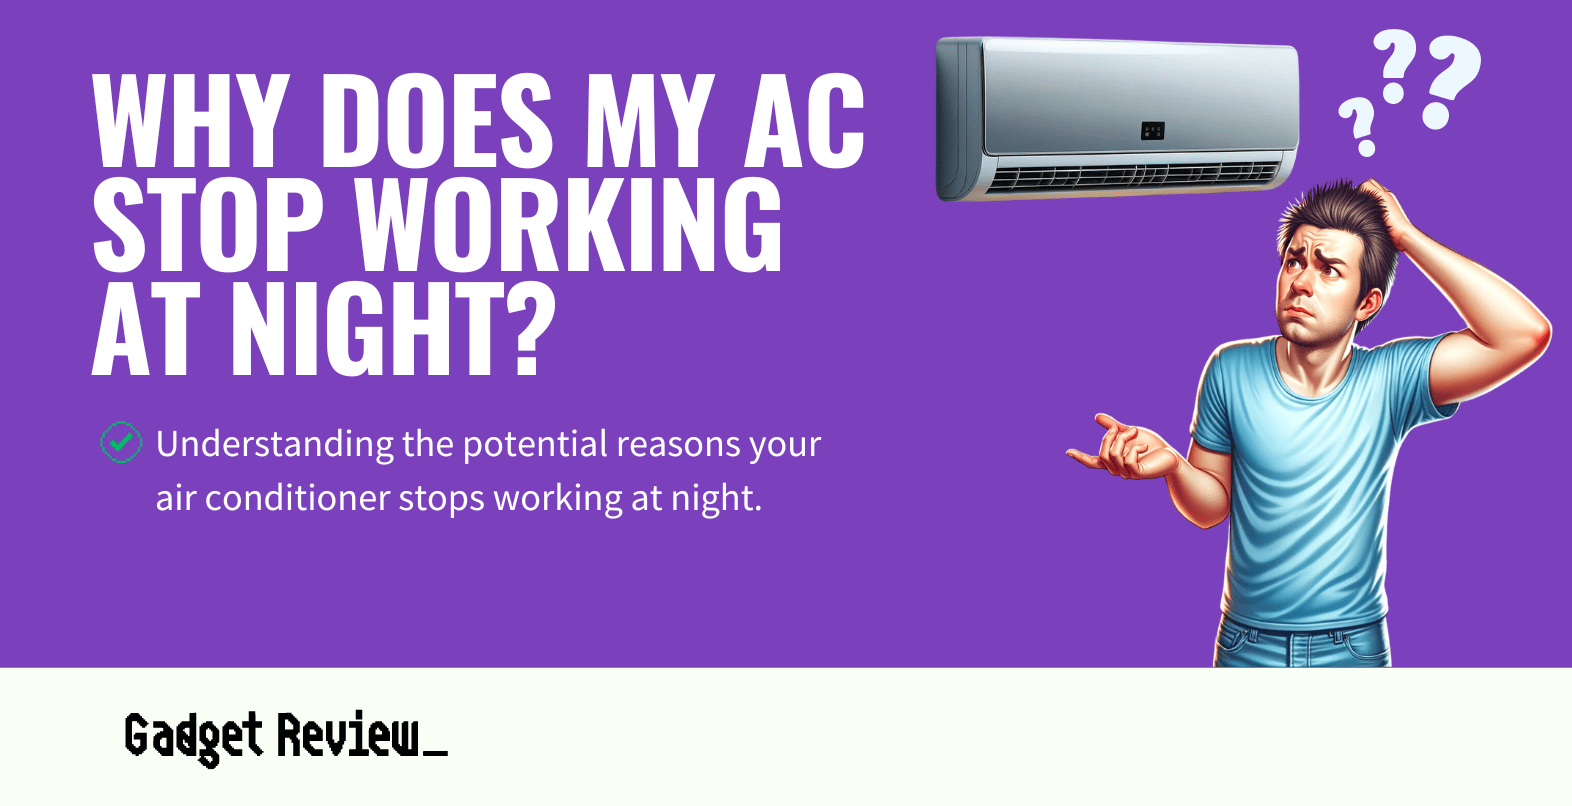 Why Does My AC Stop Working at Night?